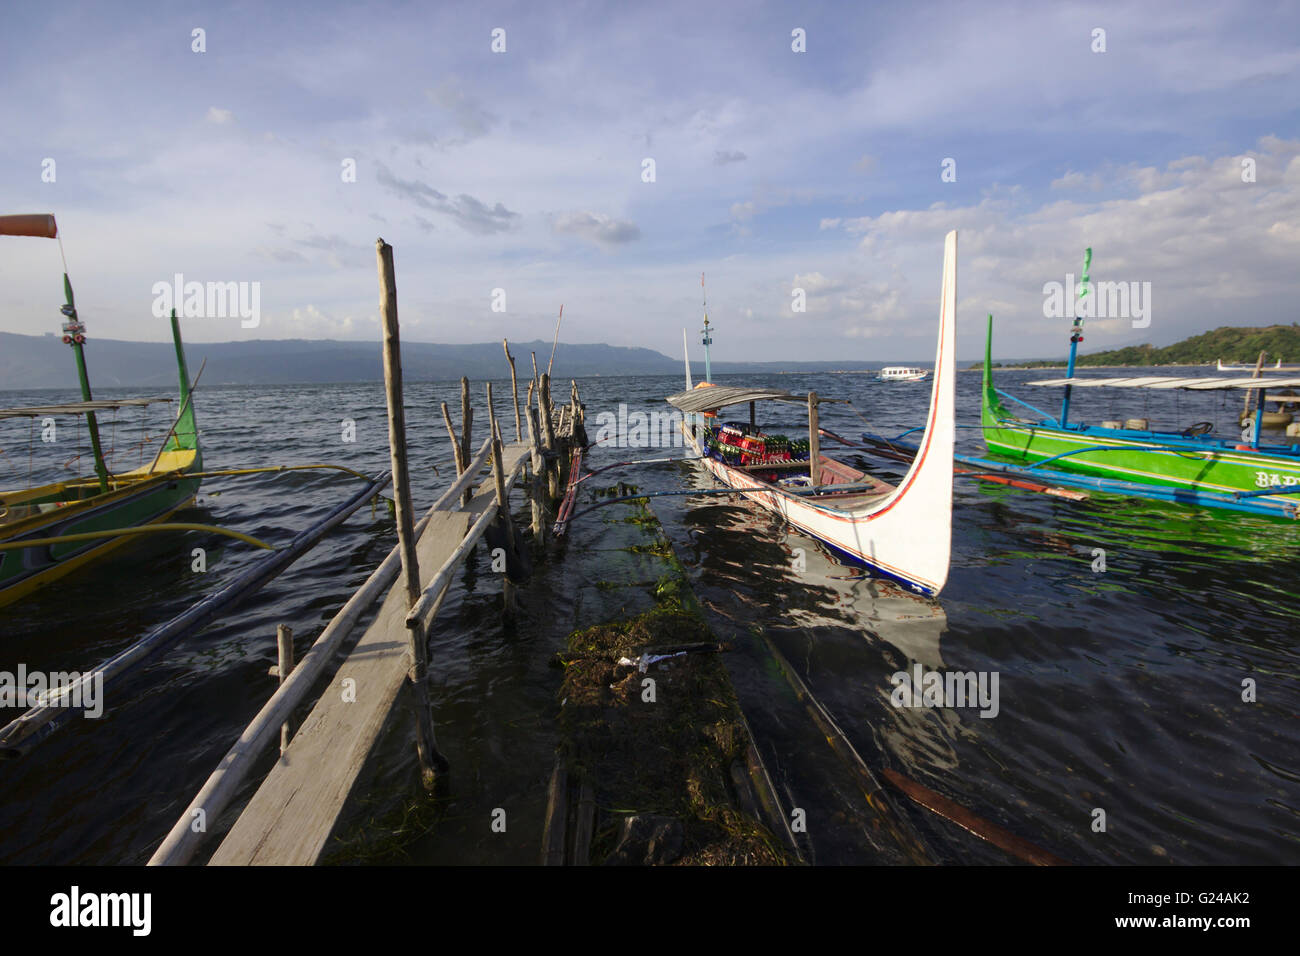 Outrigger boats on the shore of volcano island, Lake Taal, Philippines Stock Photo